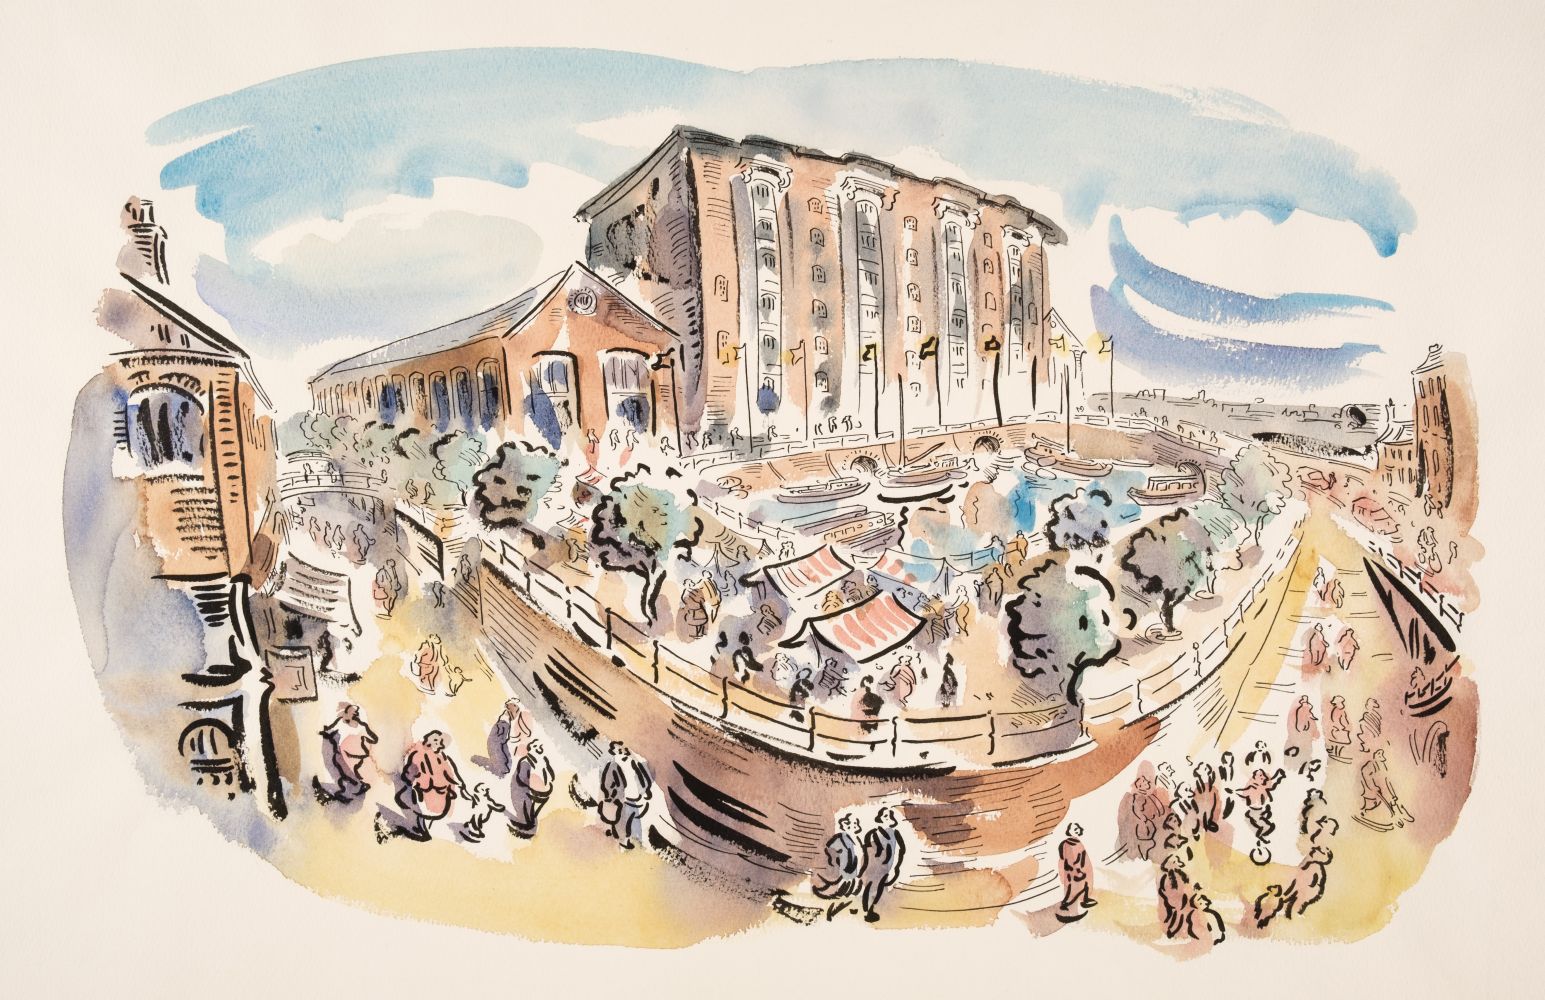 Cox (Paul, 1957-). Camden Lock, watercolour and ink on paper